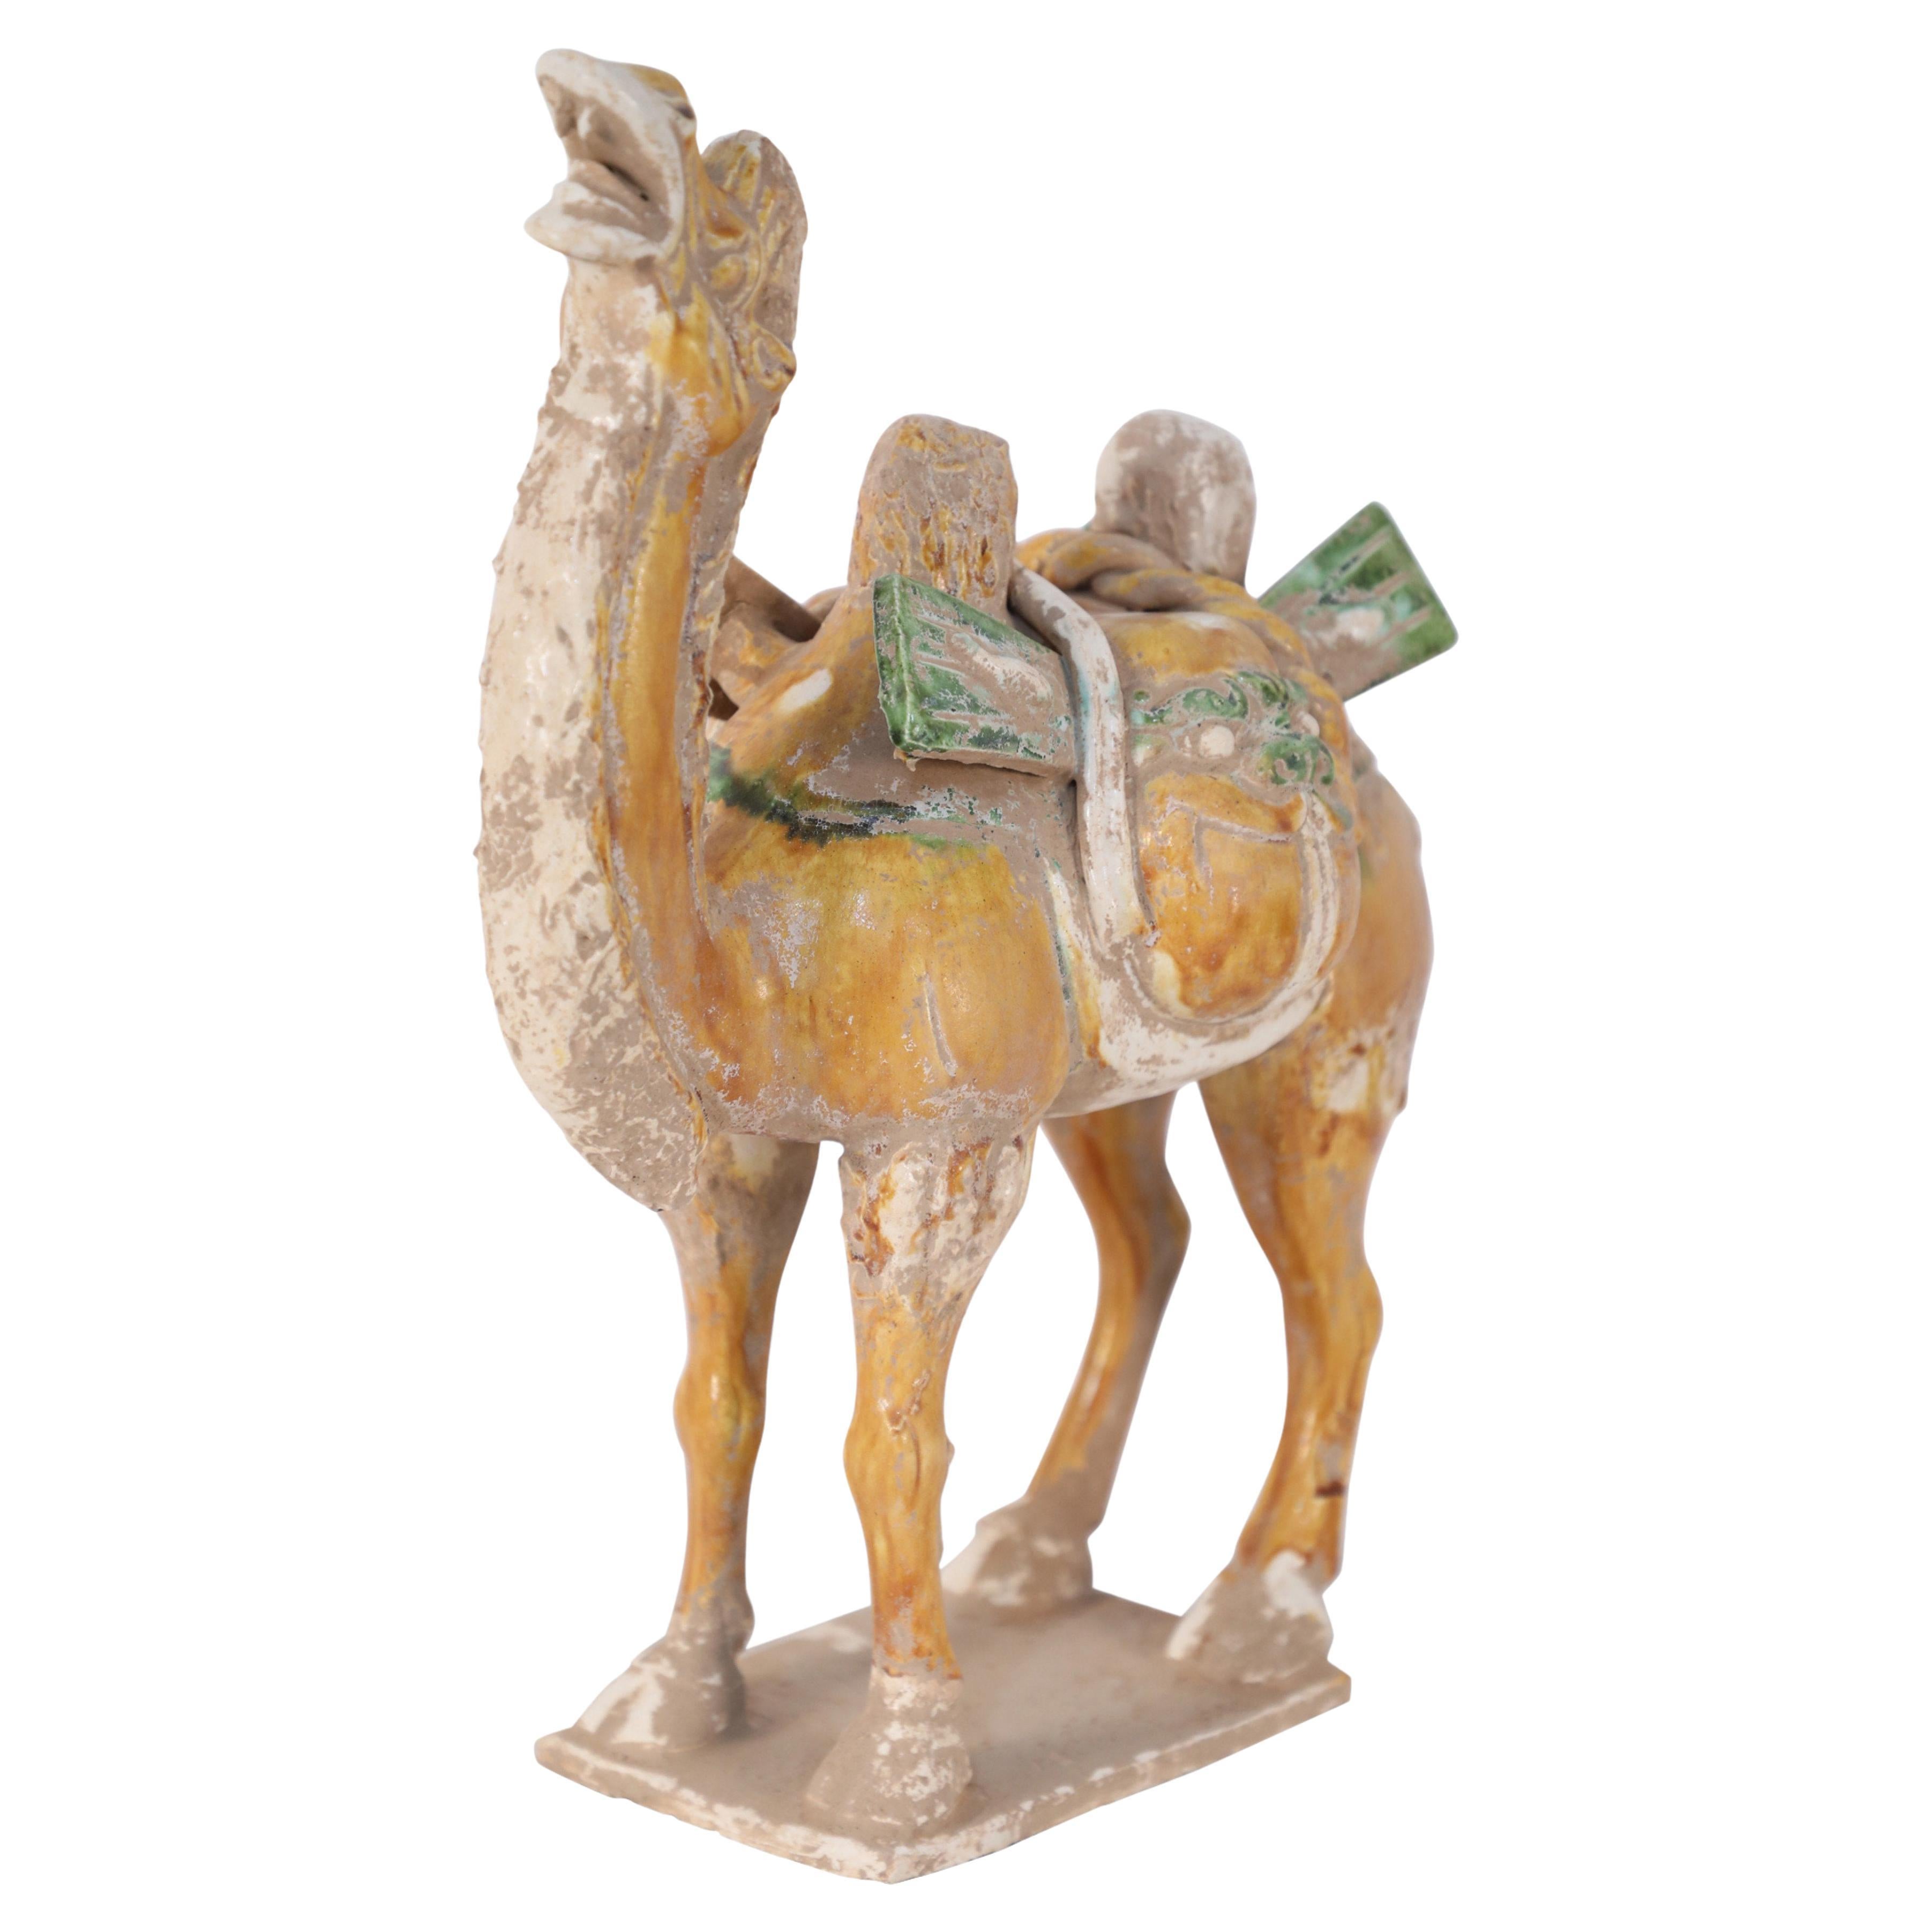 Chinese Tang Dynasty-Style Sancai Glazed Terra Cotta Camel Tomb Figure